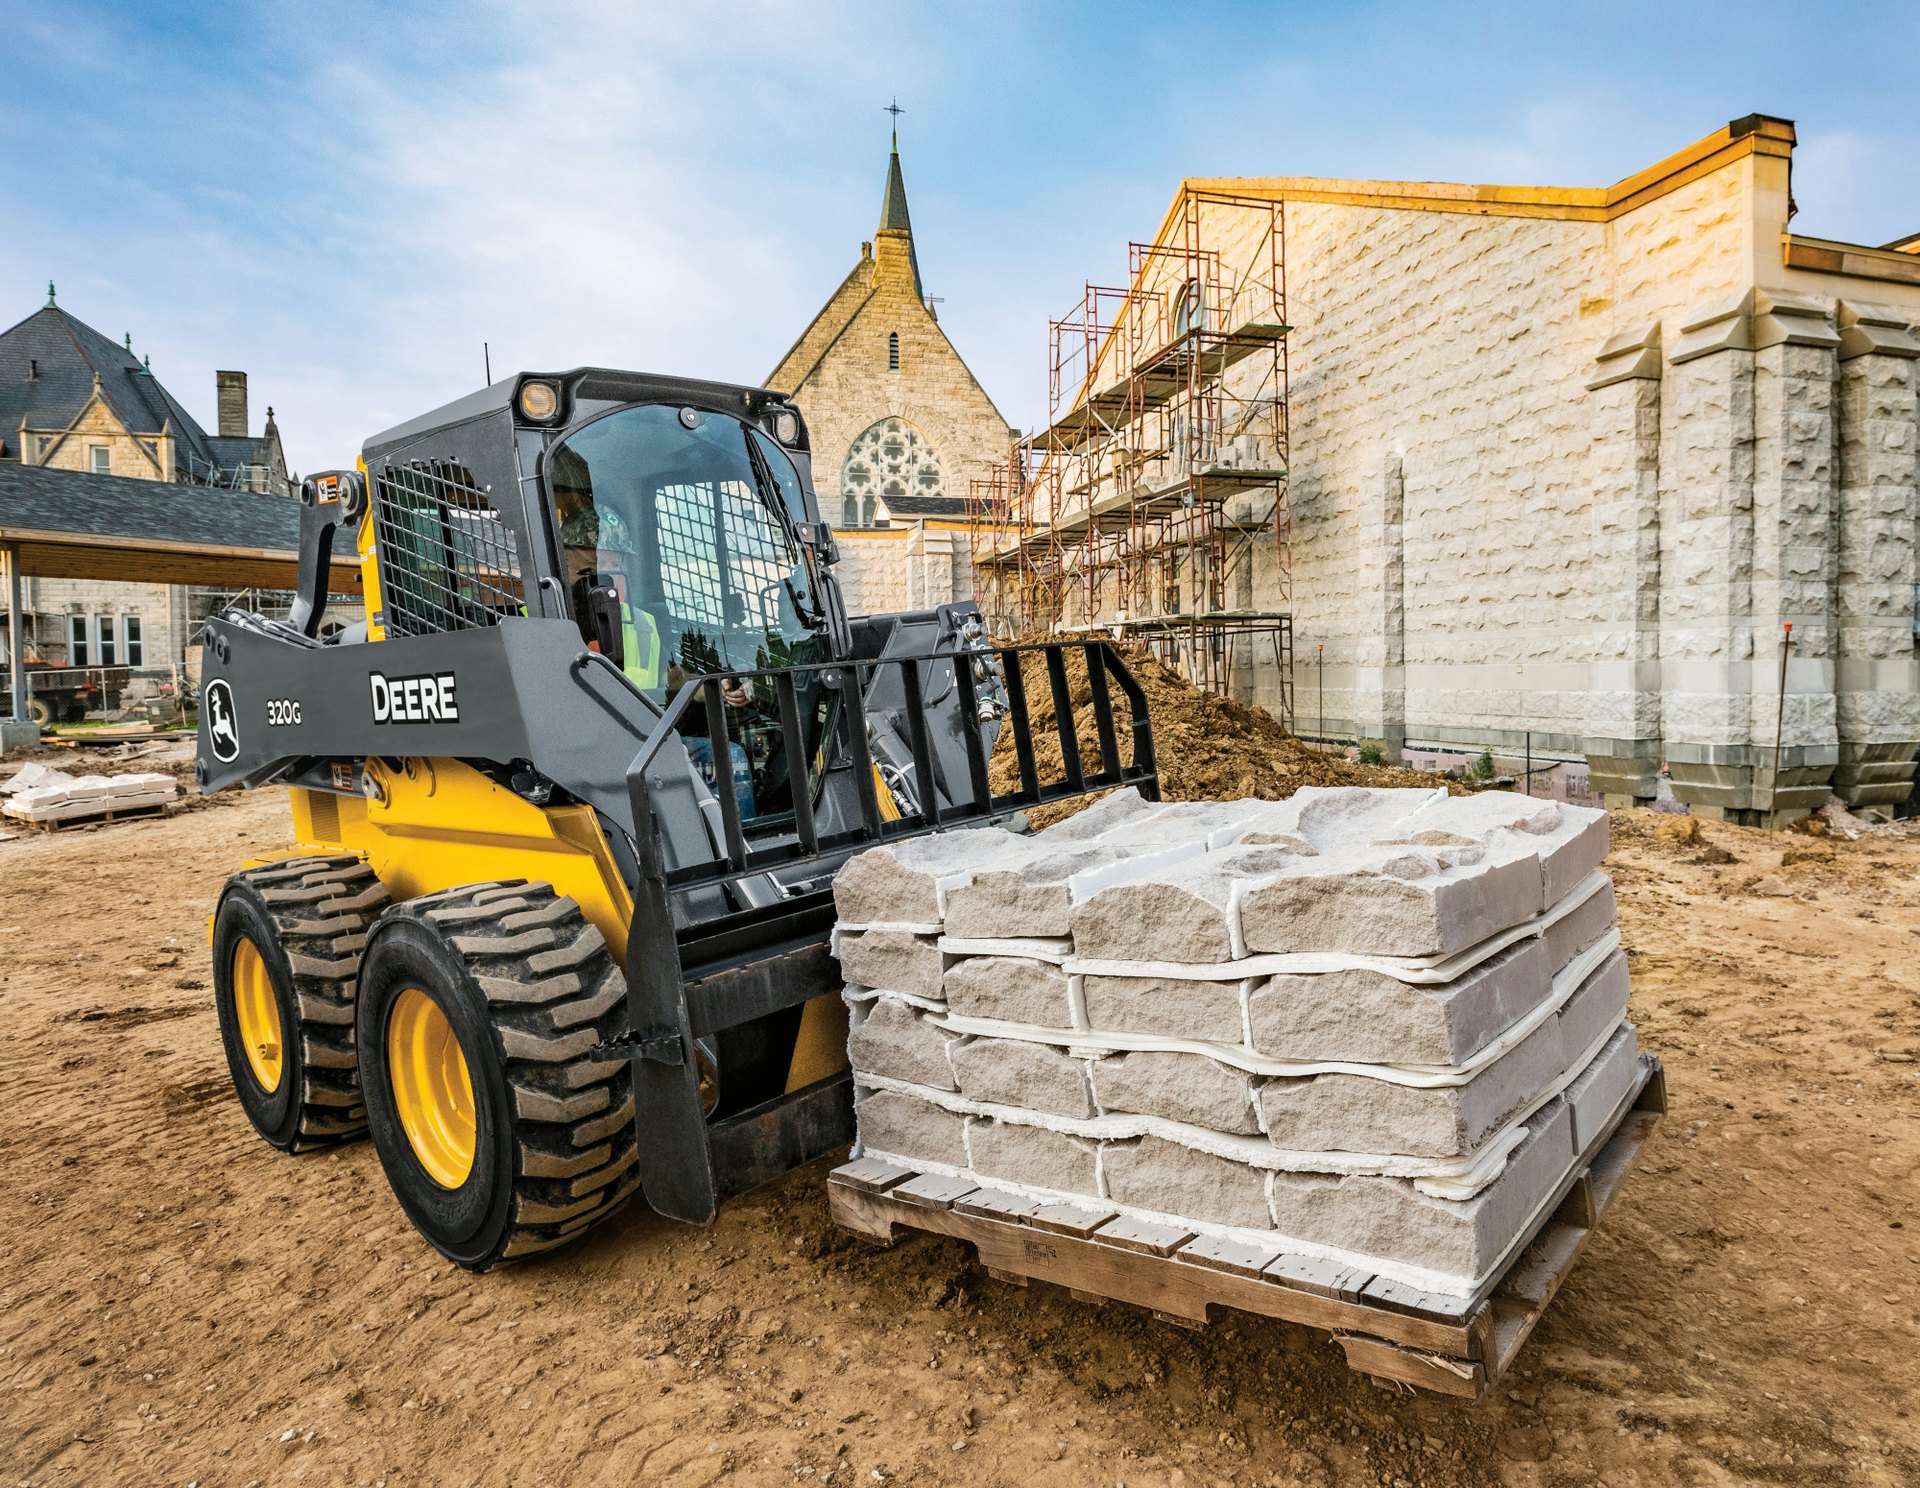 Comfortability and versatility are key when it comes to what rental companies should think about for their skid-steer rental fleets.